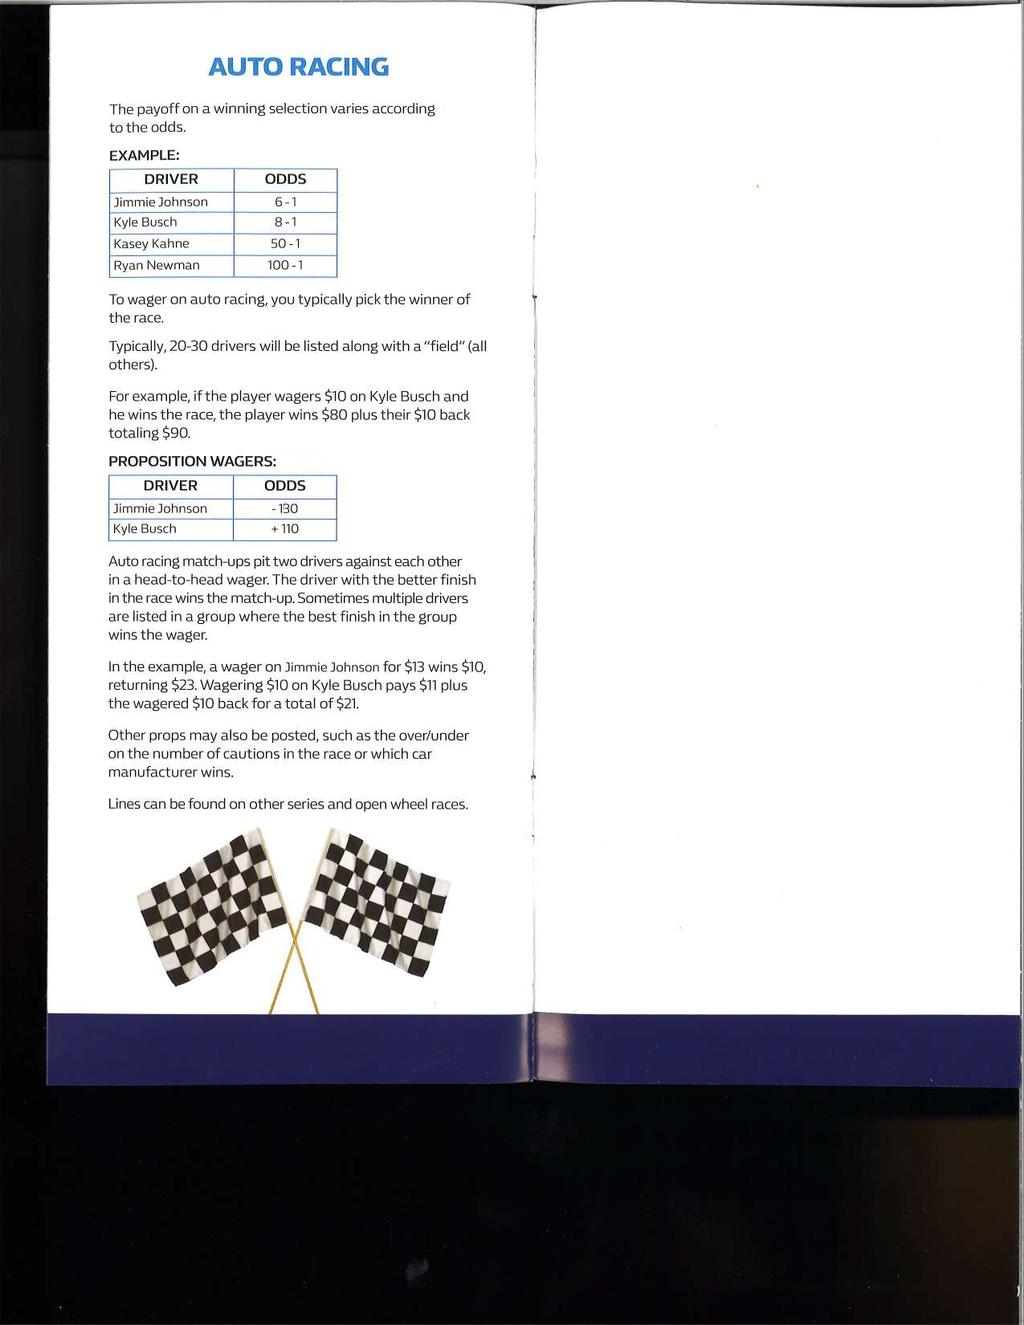 Case 2:18-cv-15204-WJM-MF Document 1-1 Filed 10/23/18 Page 16 of 17 PageID: 28 AUTO RACING The payoff on a winning selection varies according to the odds.